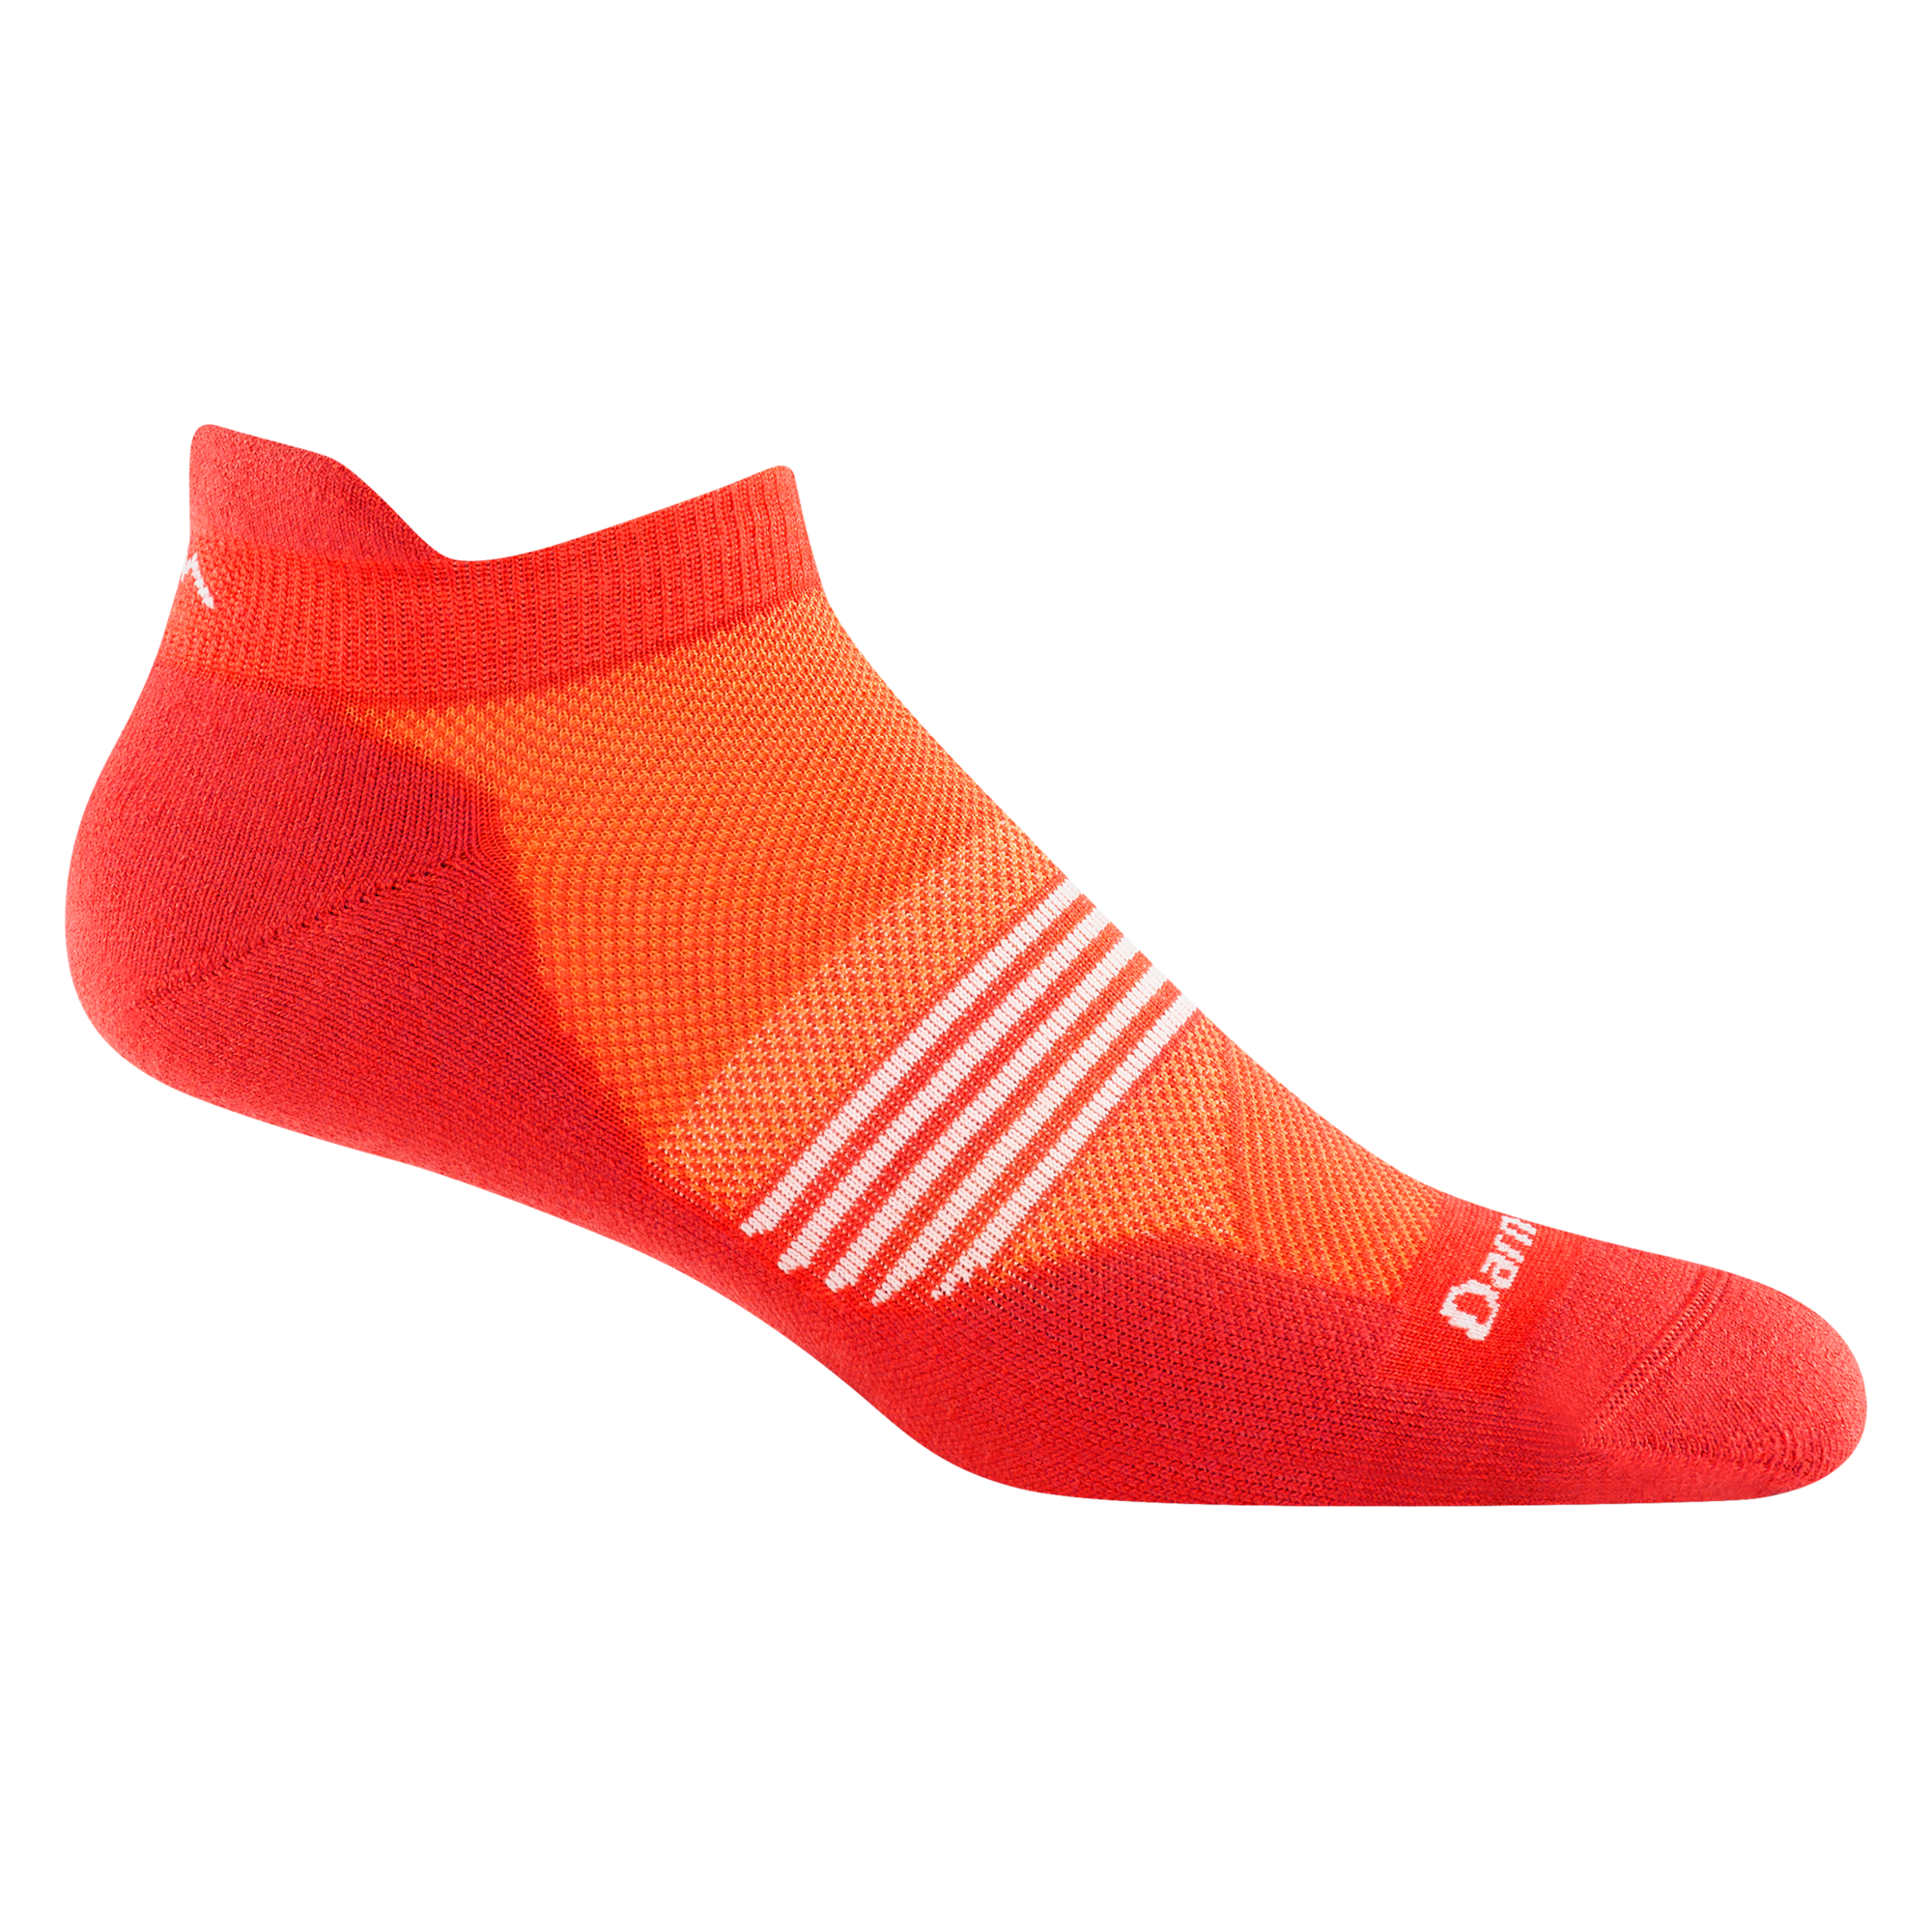 1116 men's element no-show tab running sock in tiger with white horizontal forefoot striping